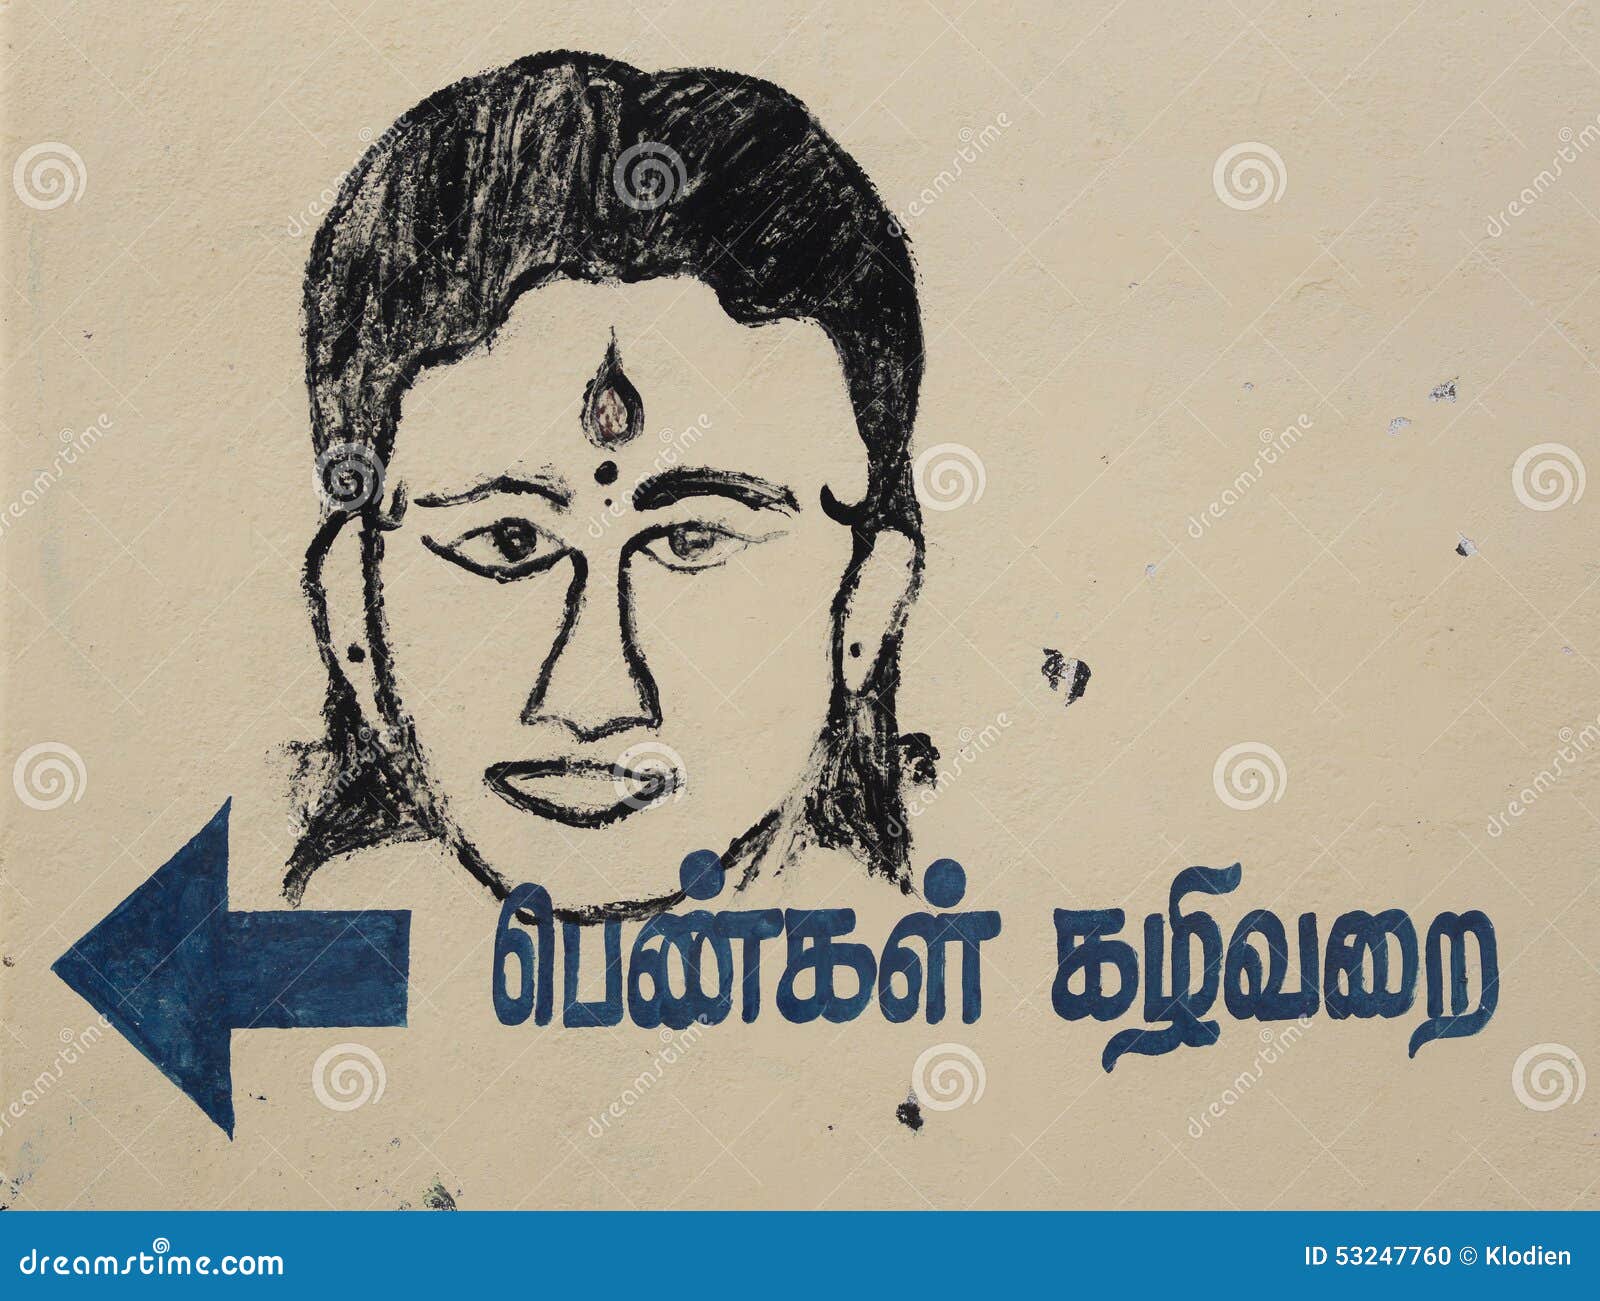 KUMBAKONAM, INDIA - OCTOBER 12, 2013: Sign for Women toilet with explanation in Tamil language. Primitive drawing of the head of a female with weird tikka ... - sign-womens-toilet-explanation-tamil-kumbakonam-india-october-women-language-primitive-drawing-head-female-53247760